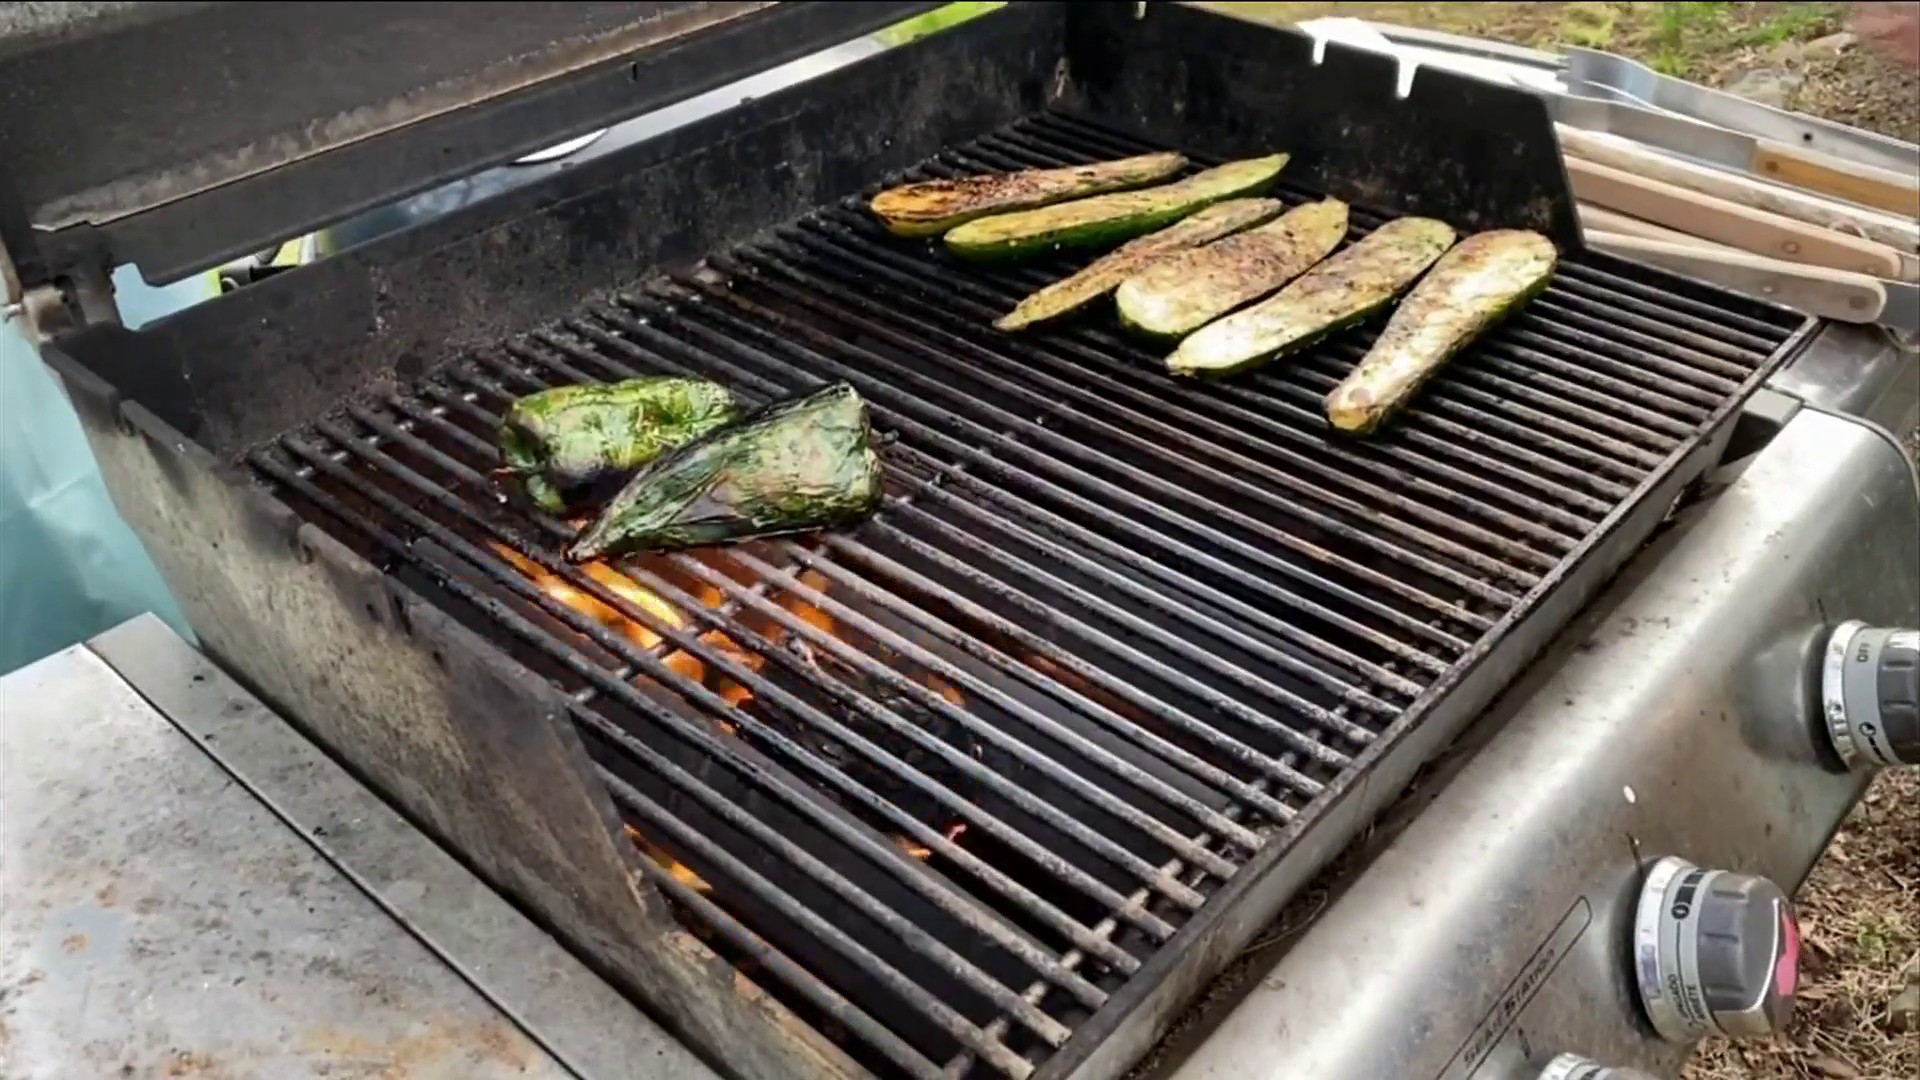 Skibform kasseapparat Ugle Time to get out and grill: Expert offers tips, new grill recommendations